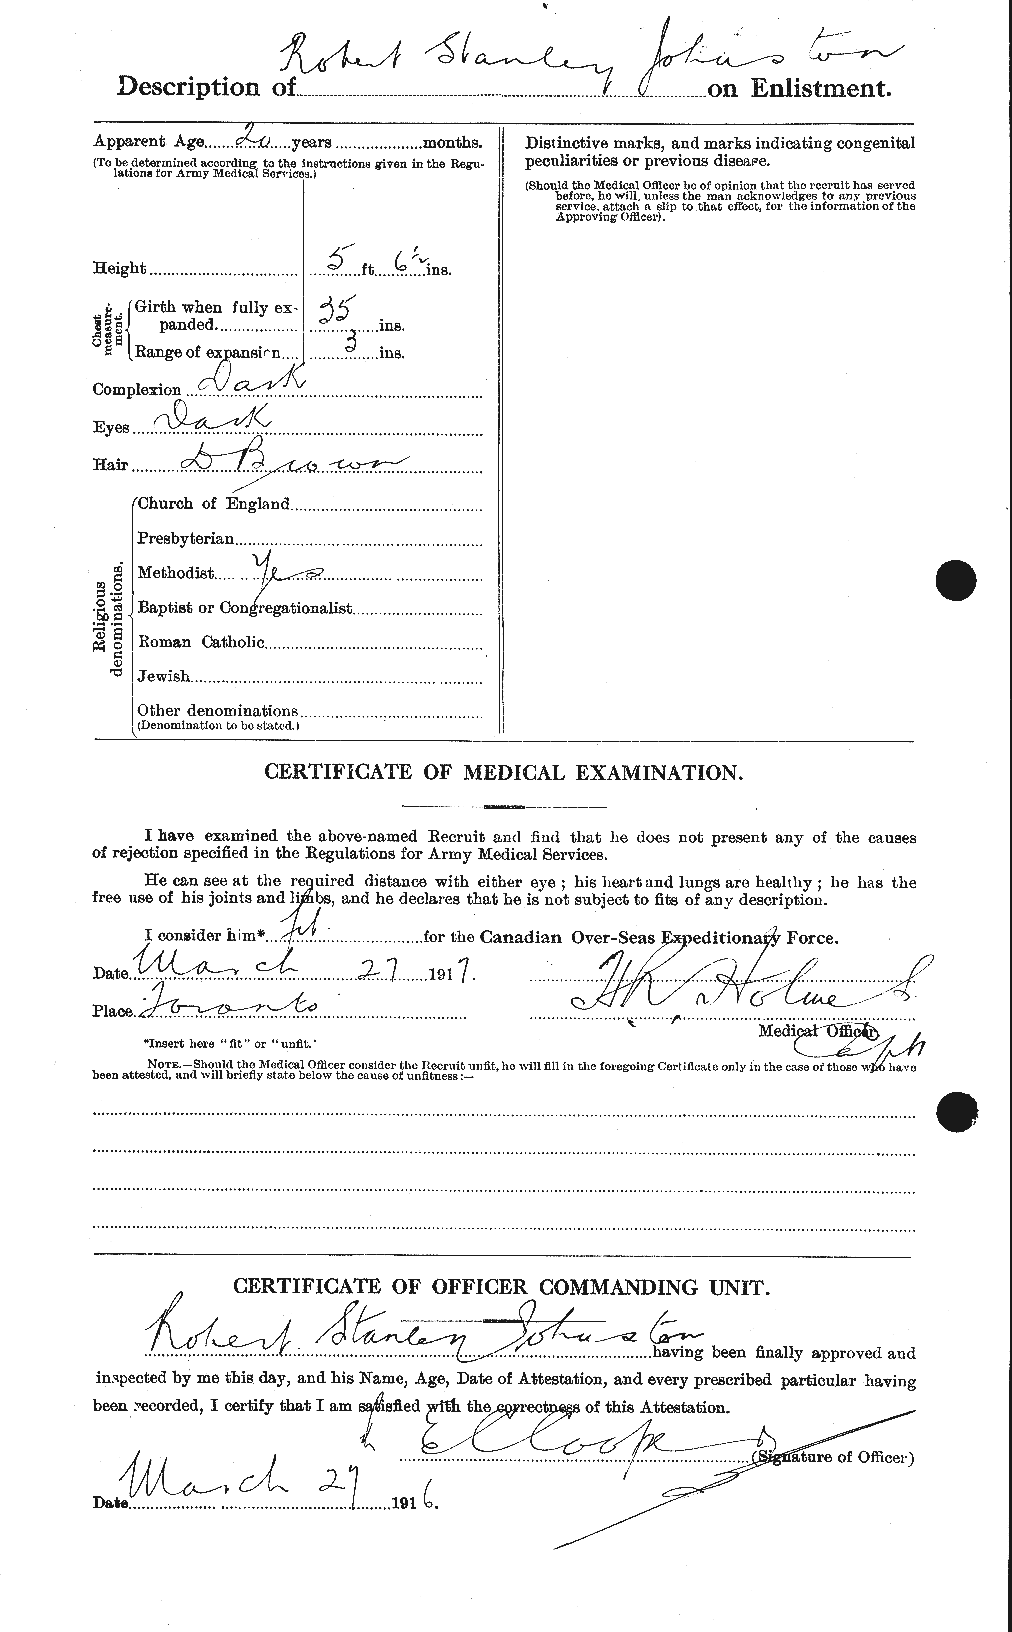 Personnel Records of the First World War - CEF 427038b